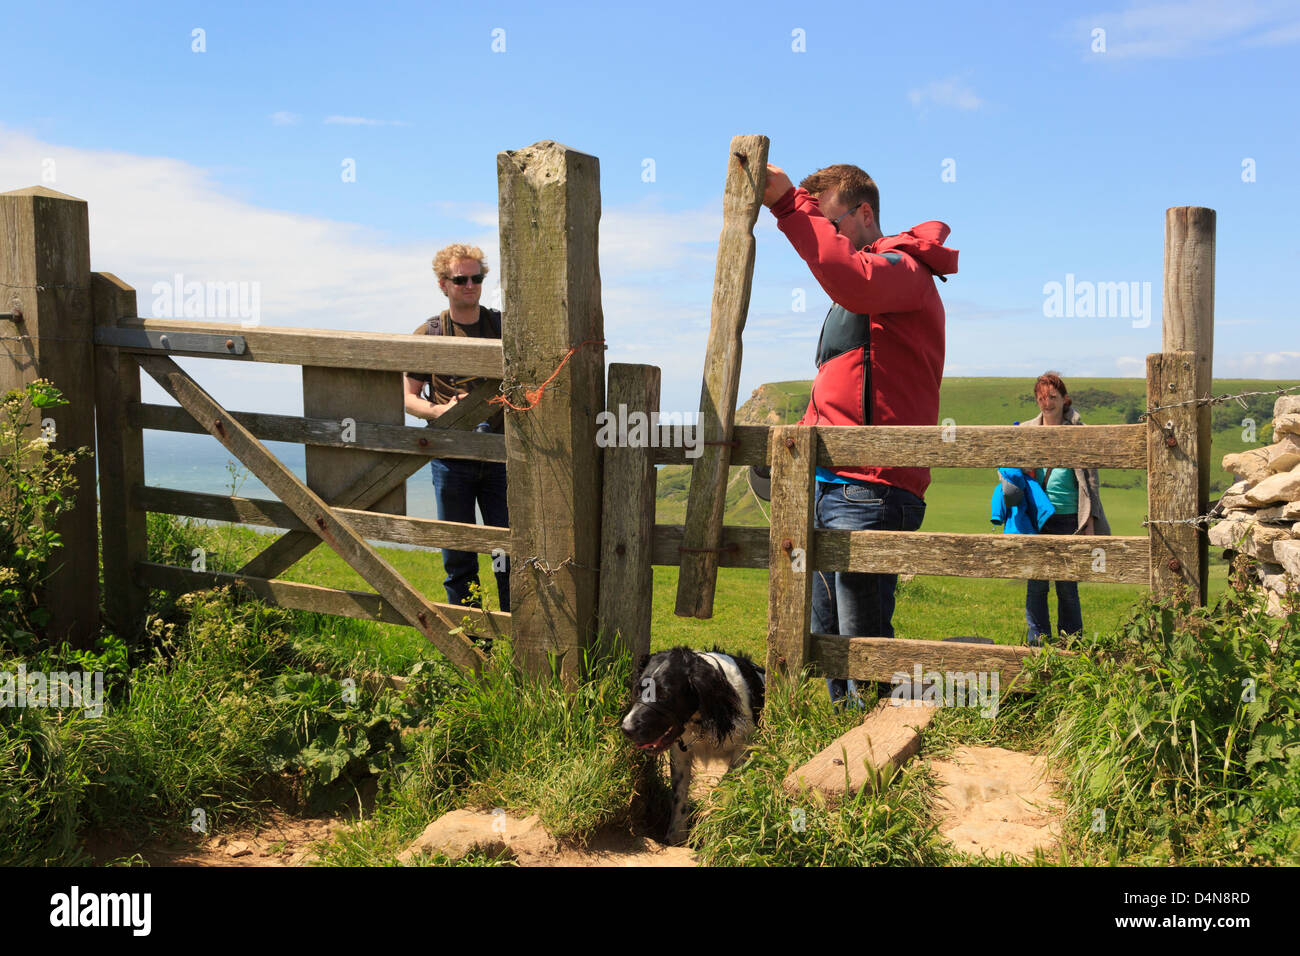 Young people walking on south west coast path with a Springer Spaniel dog using dog-friendly access stile in Purbeck hills Dorset England UK Britain Stock Photo